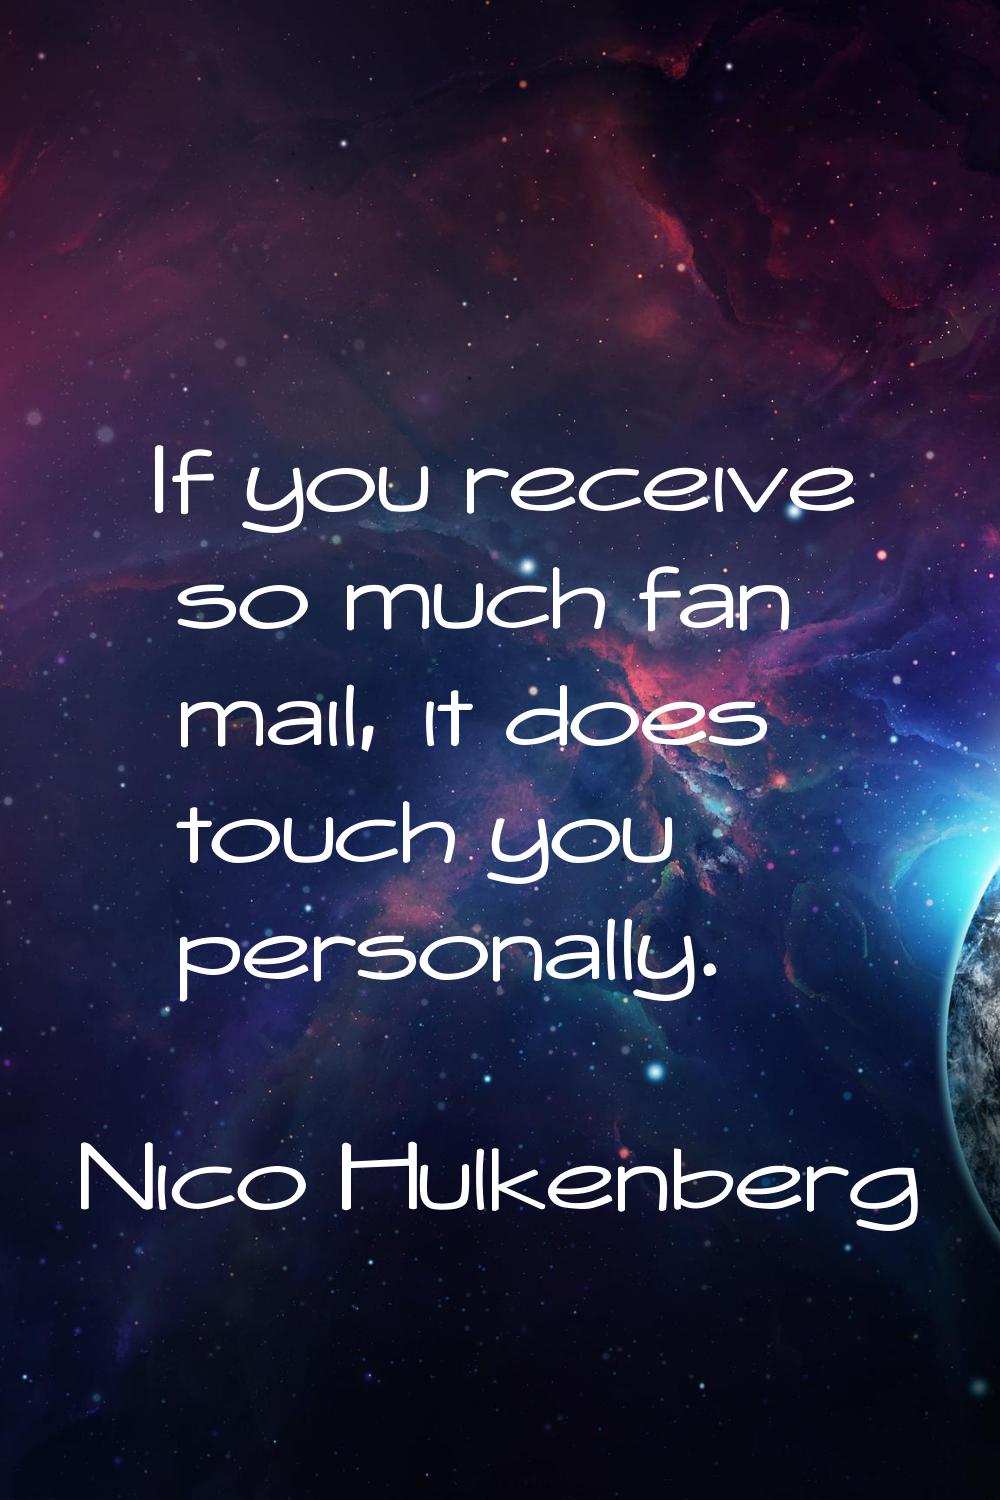 If you receive so much fan mail, it does touch you personally.